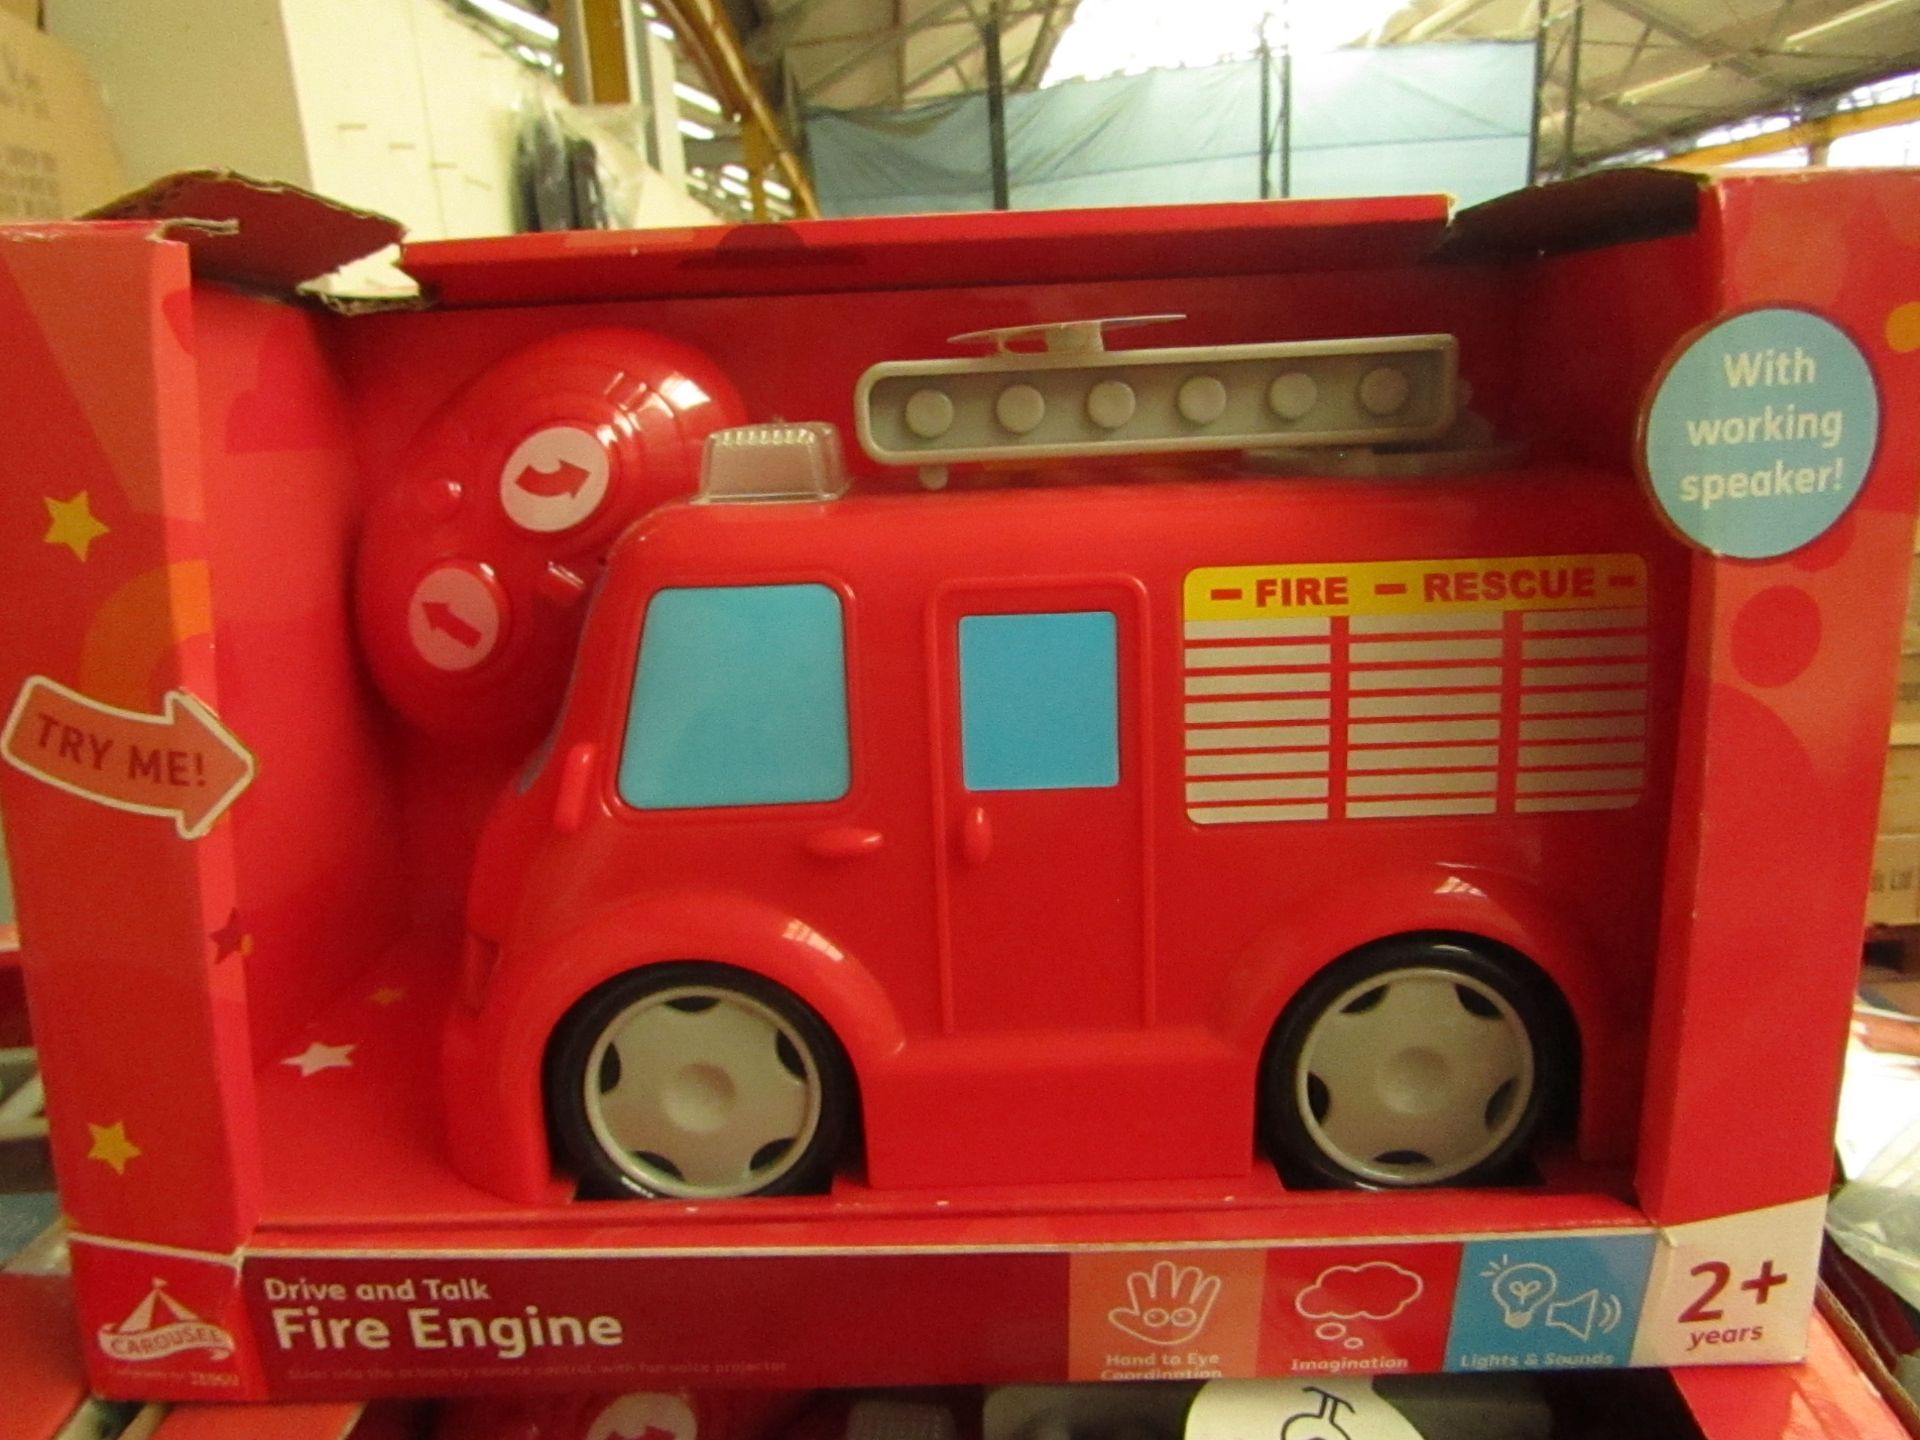 Carousel - Drive & Talk Fire Engine Toy (2+) - Boxes May Be Damaged.